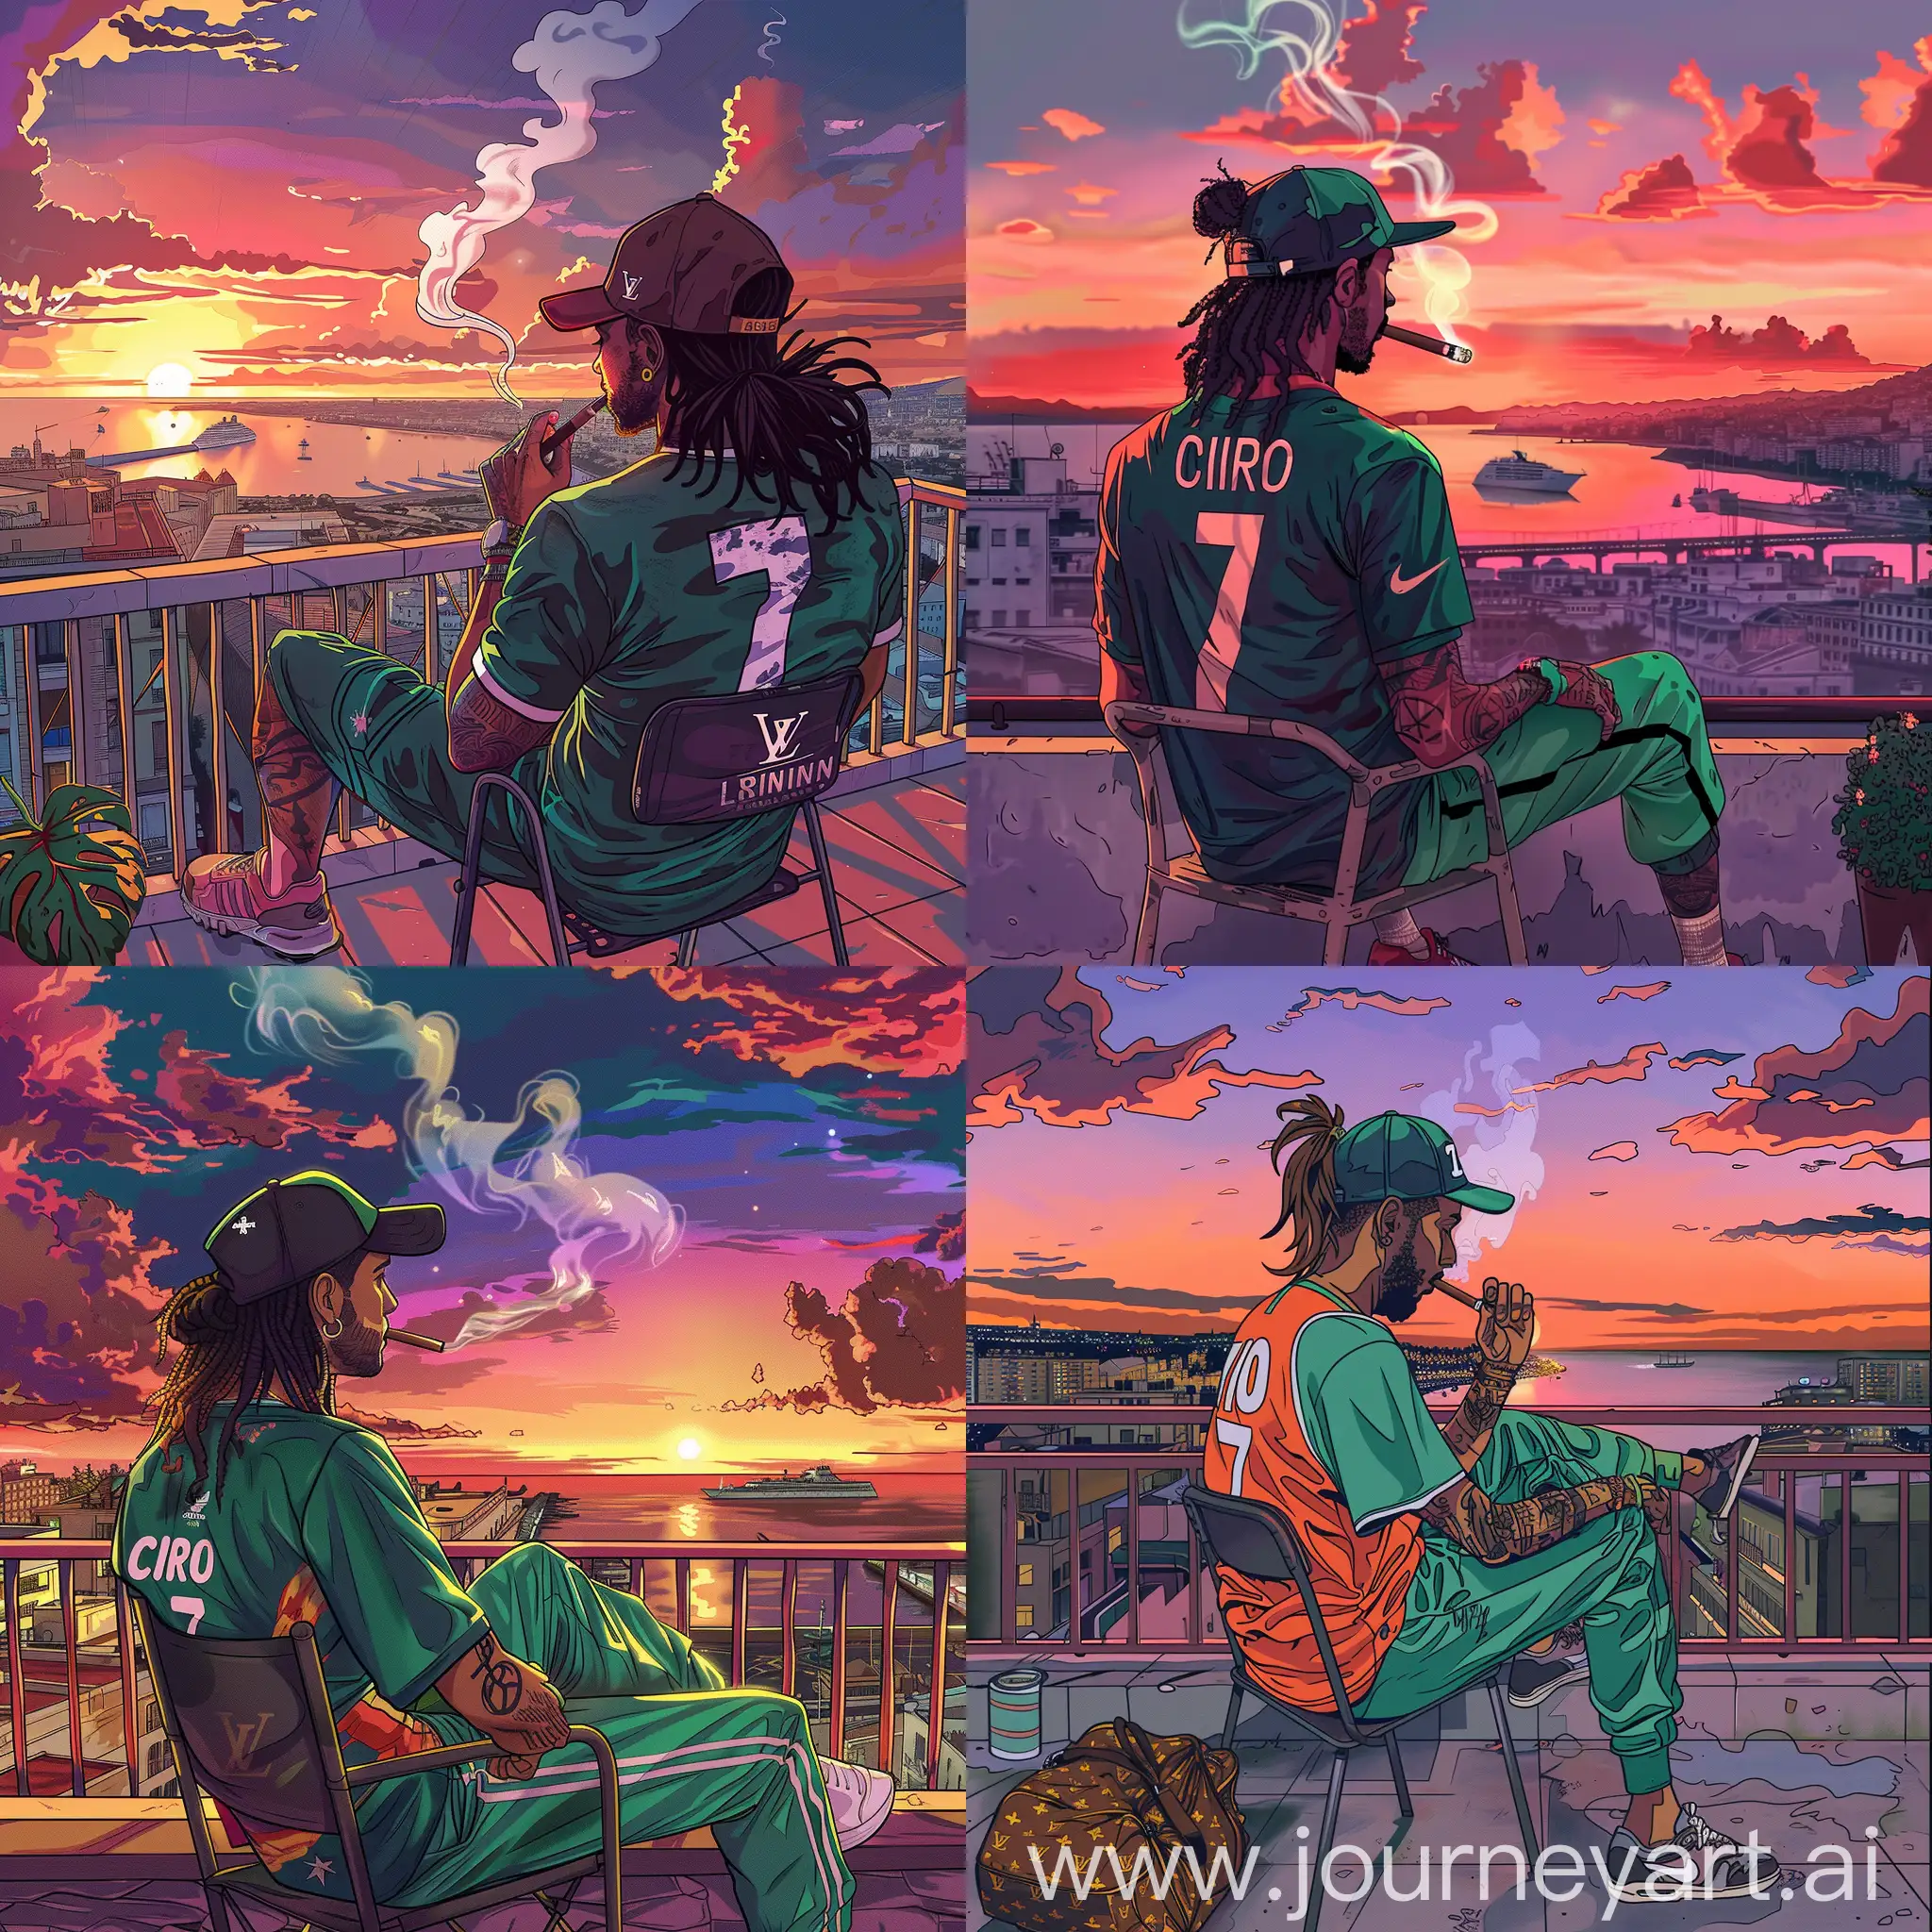 Stylish-Man-in-Algeria-Soccer-Jersey-on-Algiers-Rooftop-at-Sunset